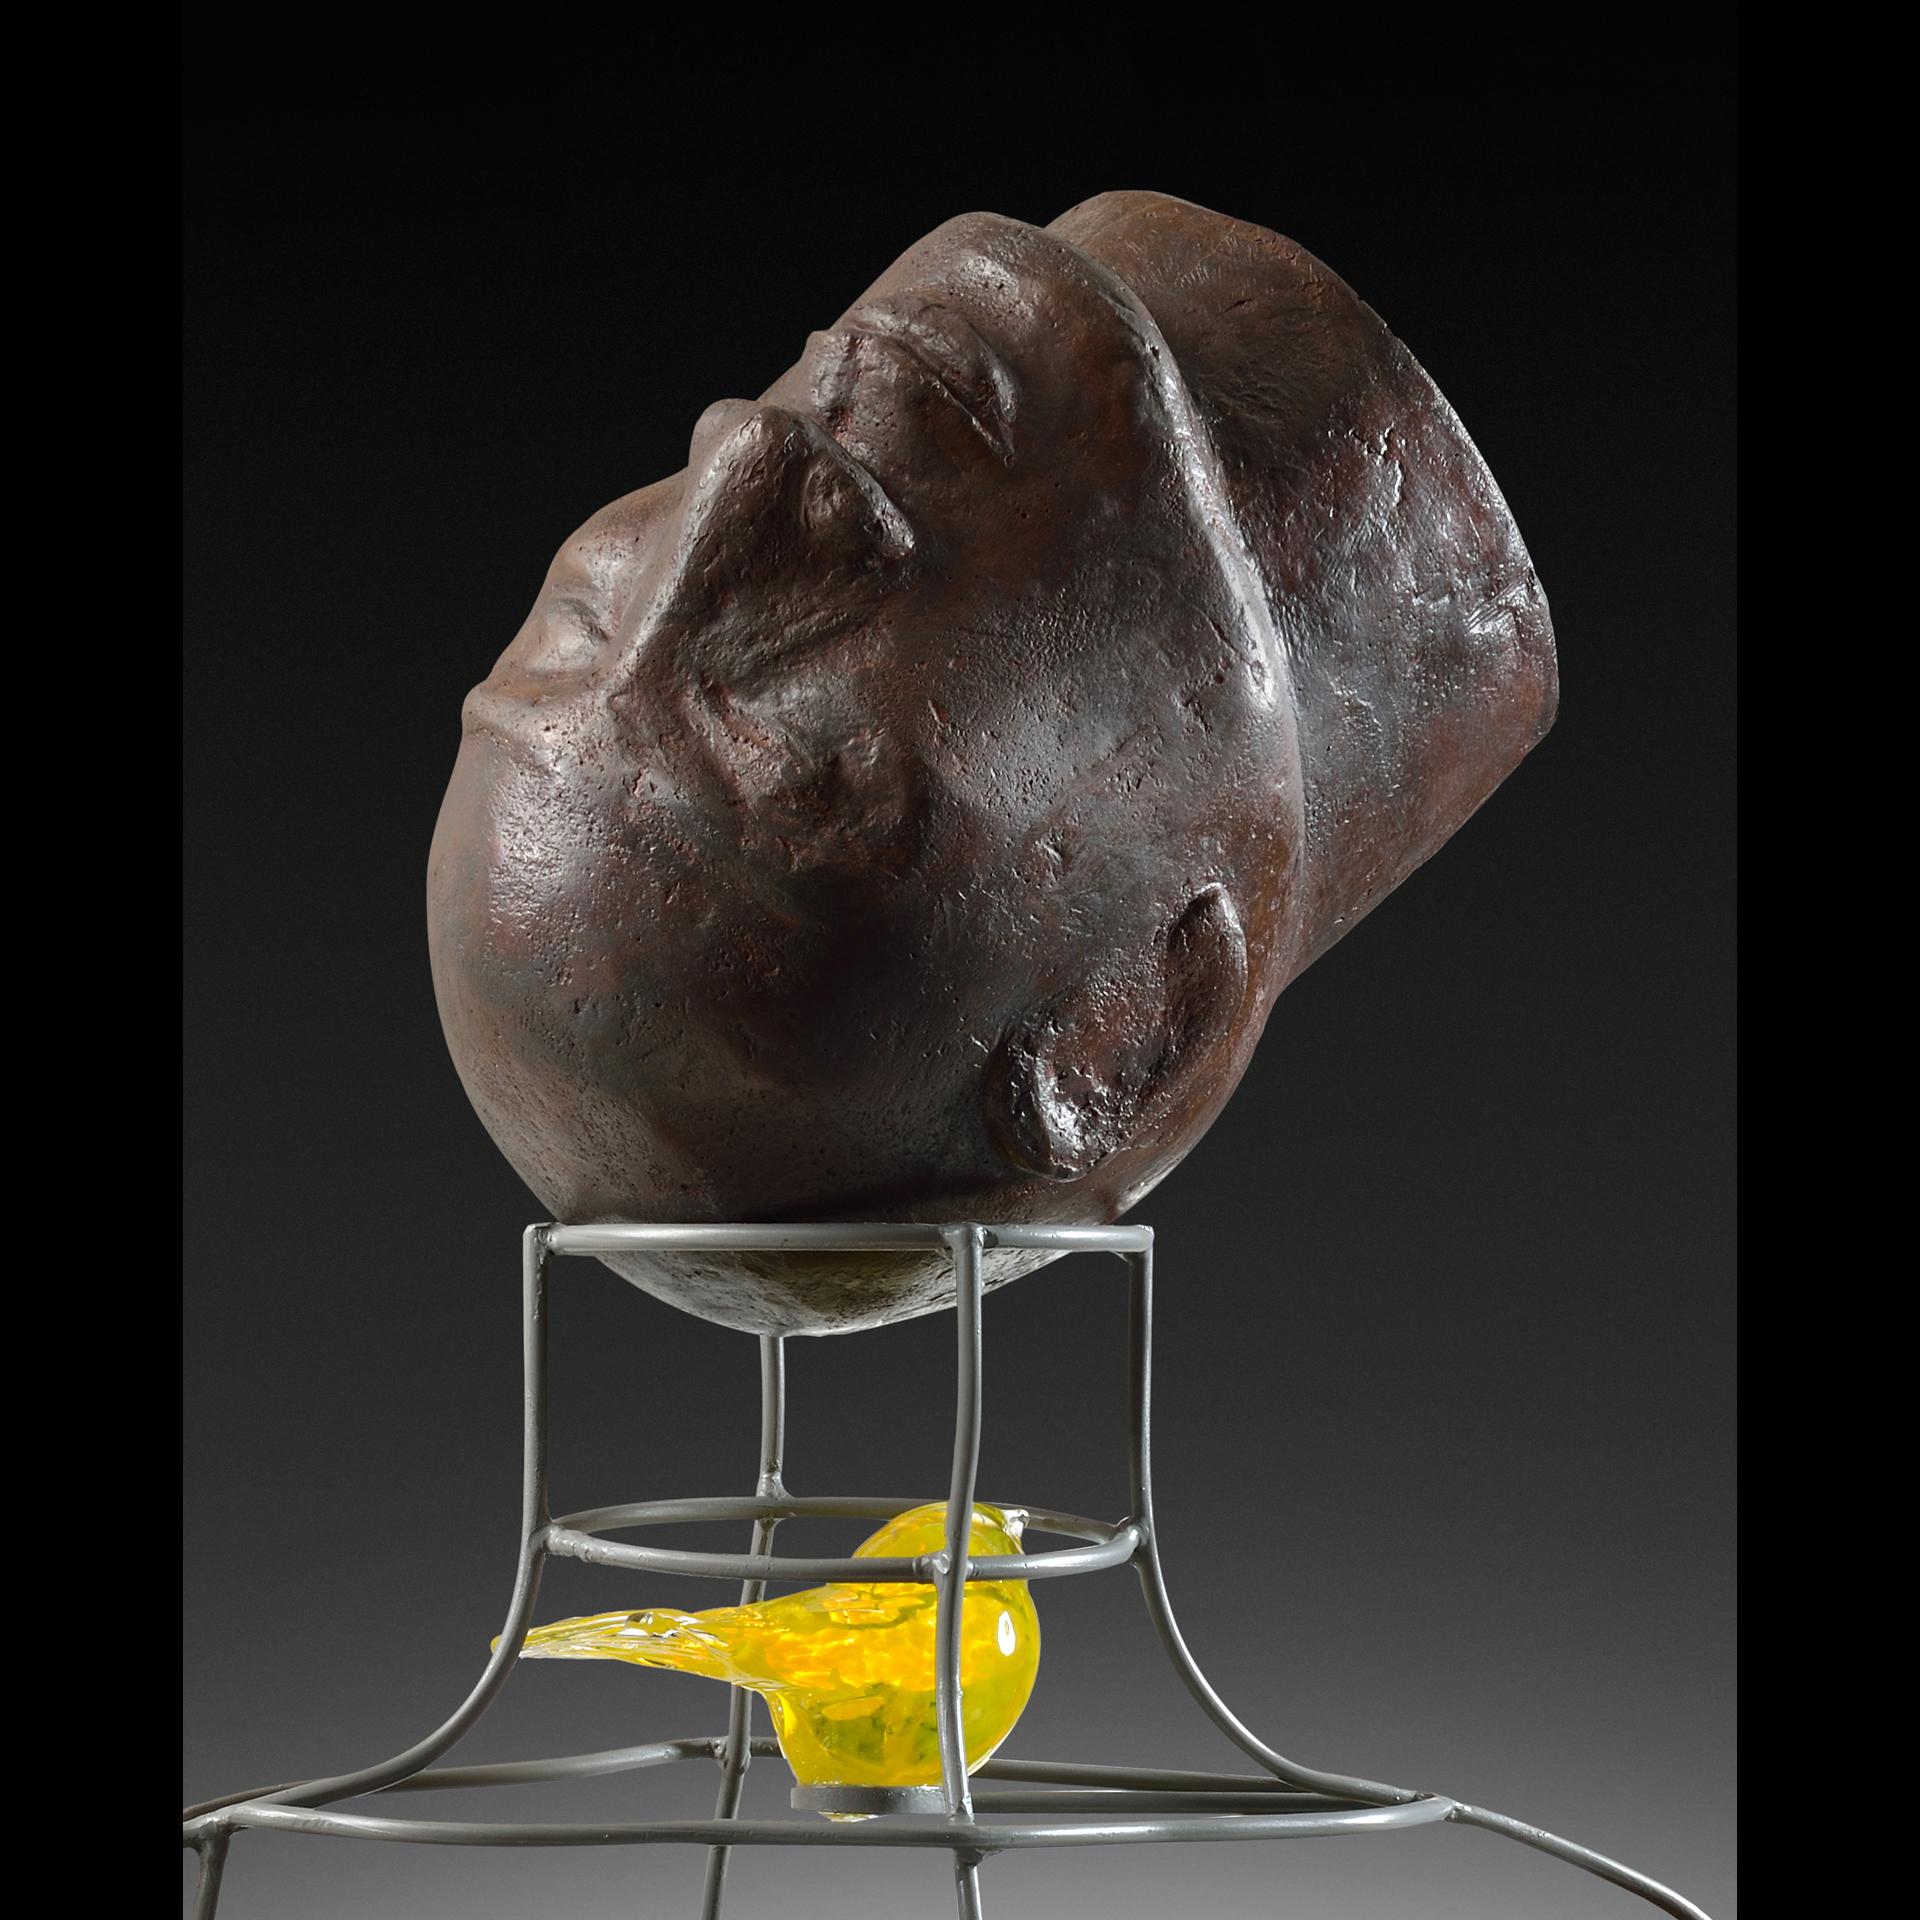 “Mindful” 
2017
A unique, surrealist sculpture made from fabricated steel, glass, cast concrete, yellow glass & paint. 
28 h x 33 w x 14 d (inches) 
Signed
Provenance: The collection of the artist

Born in Jamaica, West Indies, and raised in